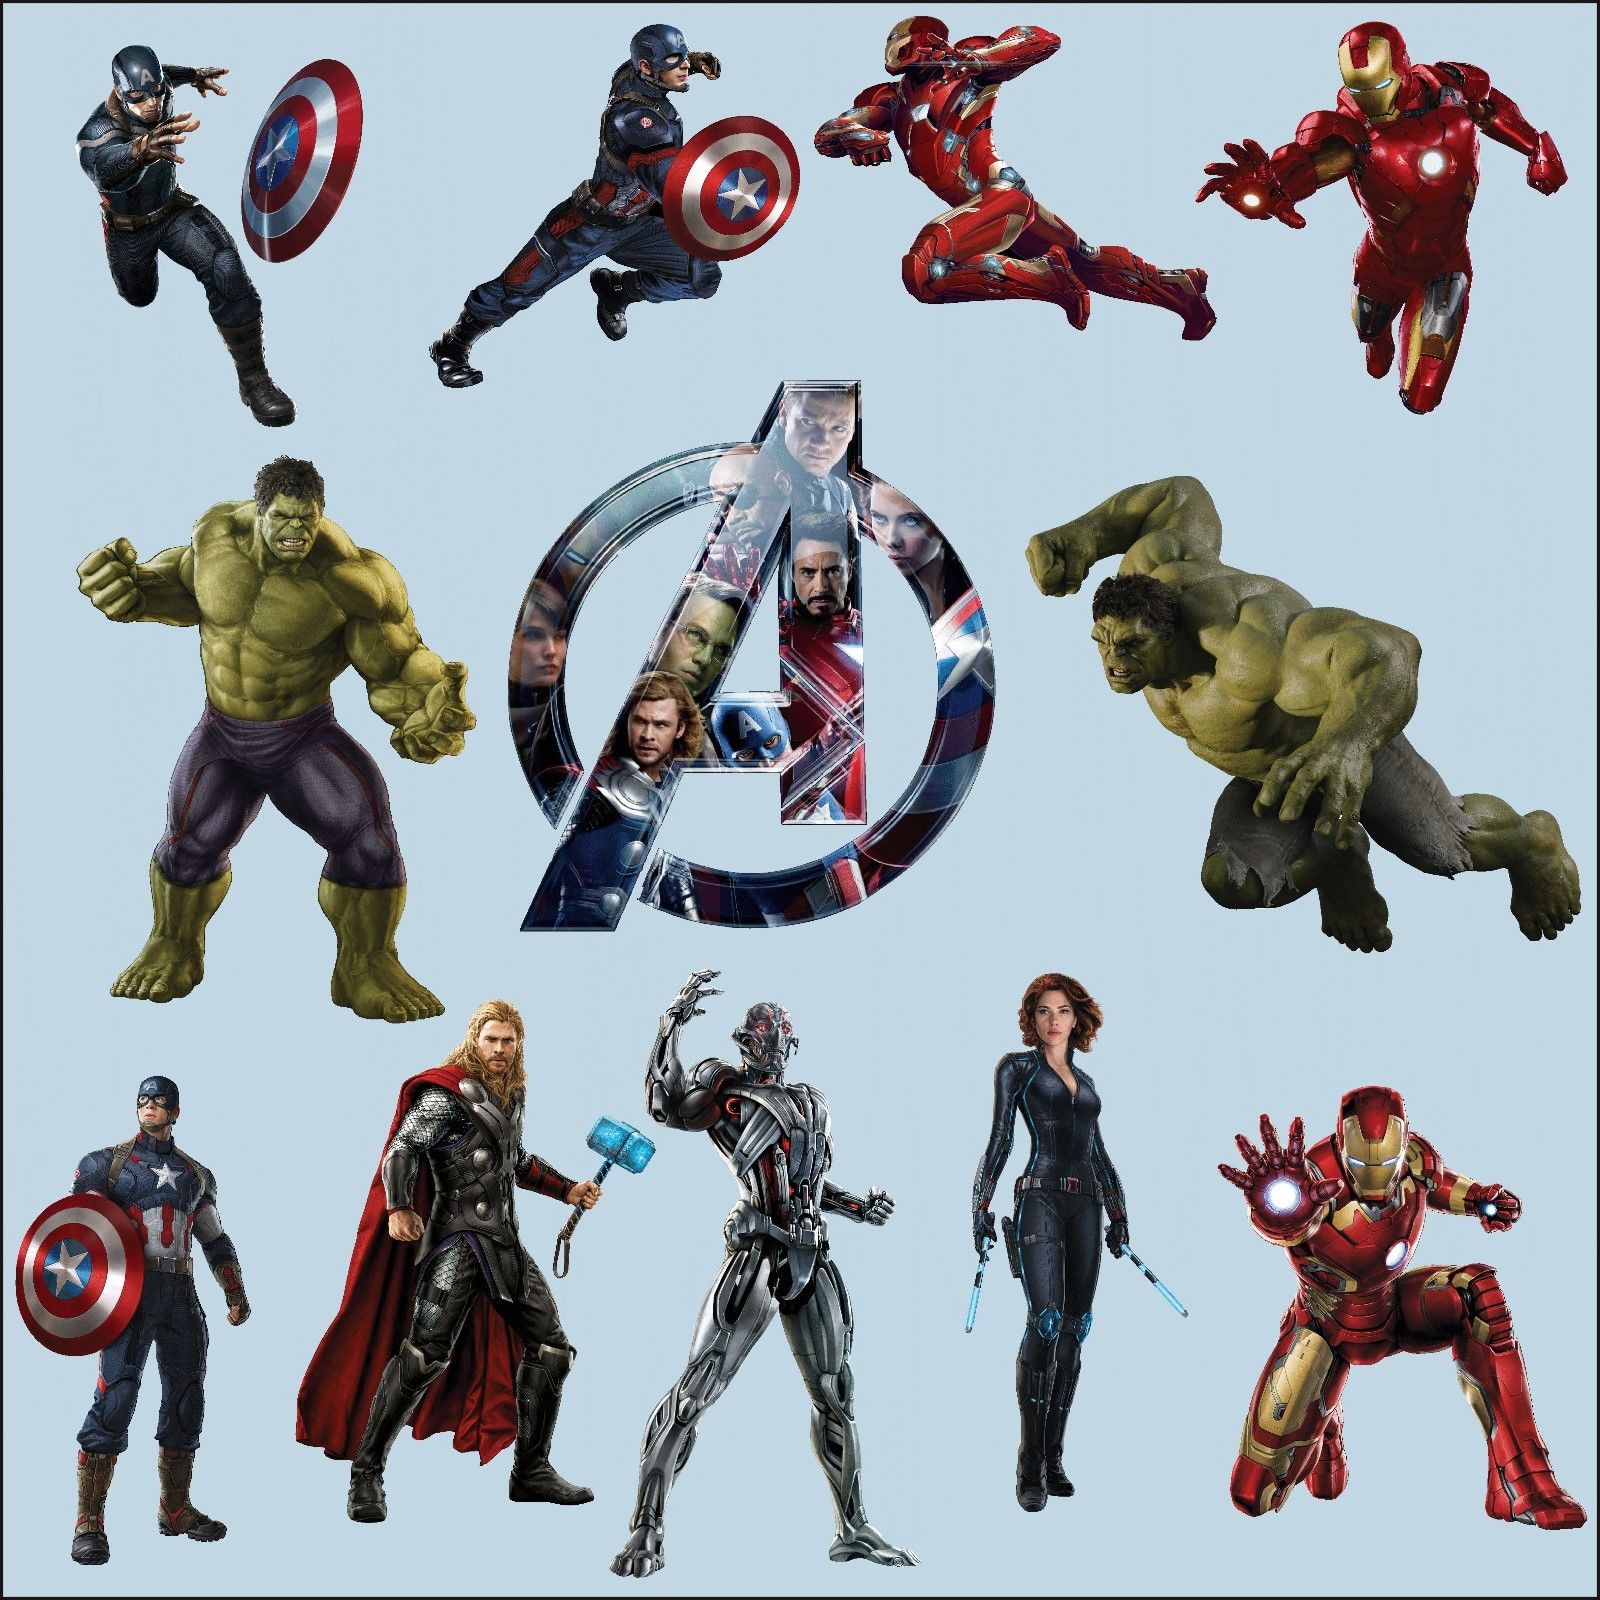 The Avengers Marvel Hero Age of Ultron Vinyl Wall Sticker Bedroom Decal XXL 1 m 